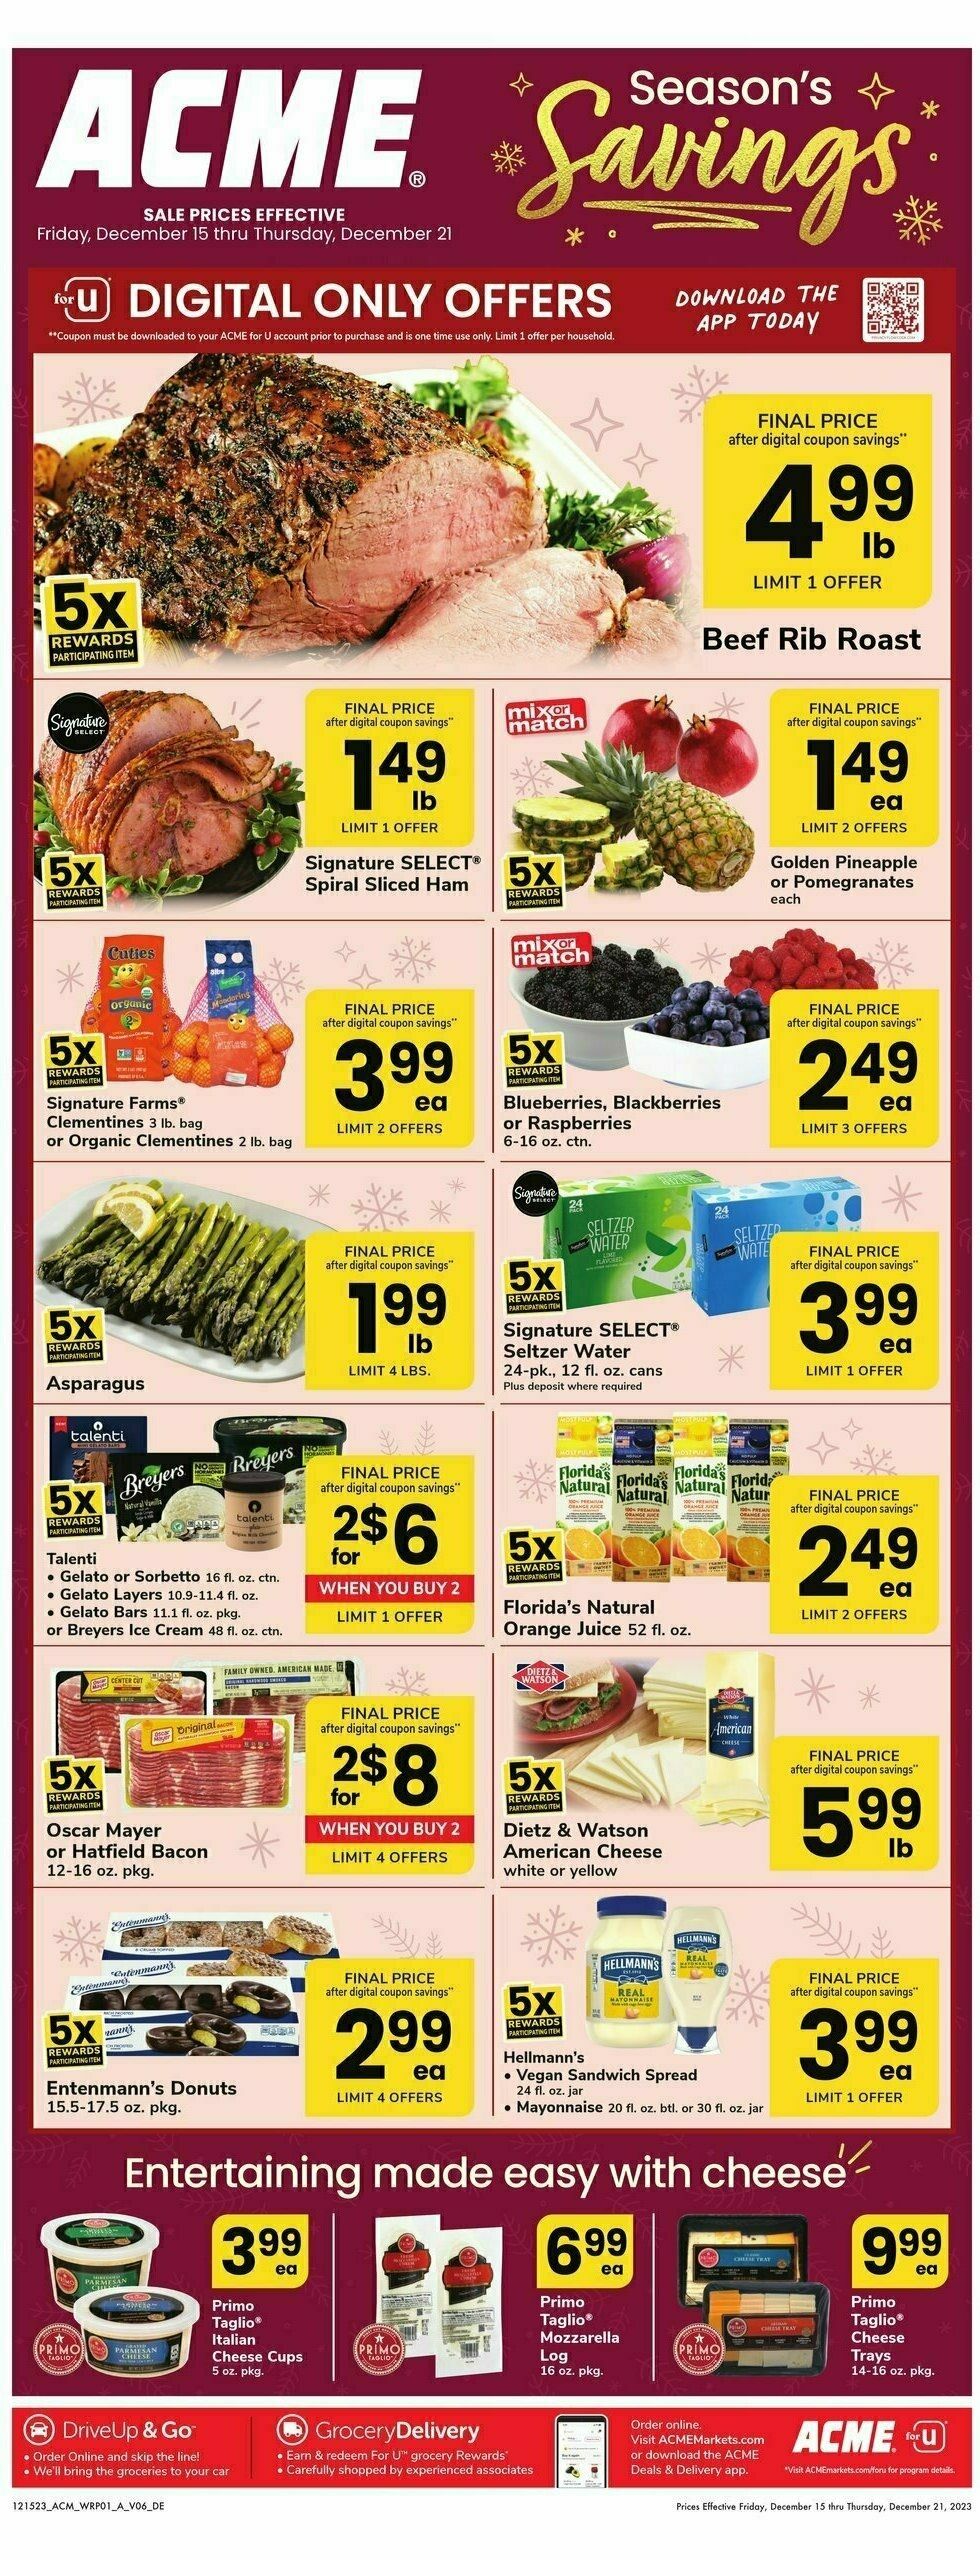 ACME Markets Weekly Ad from December 15